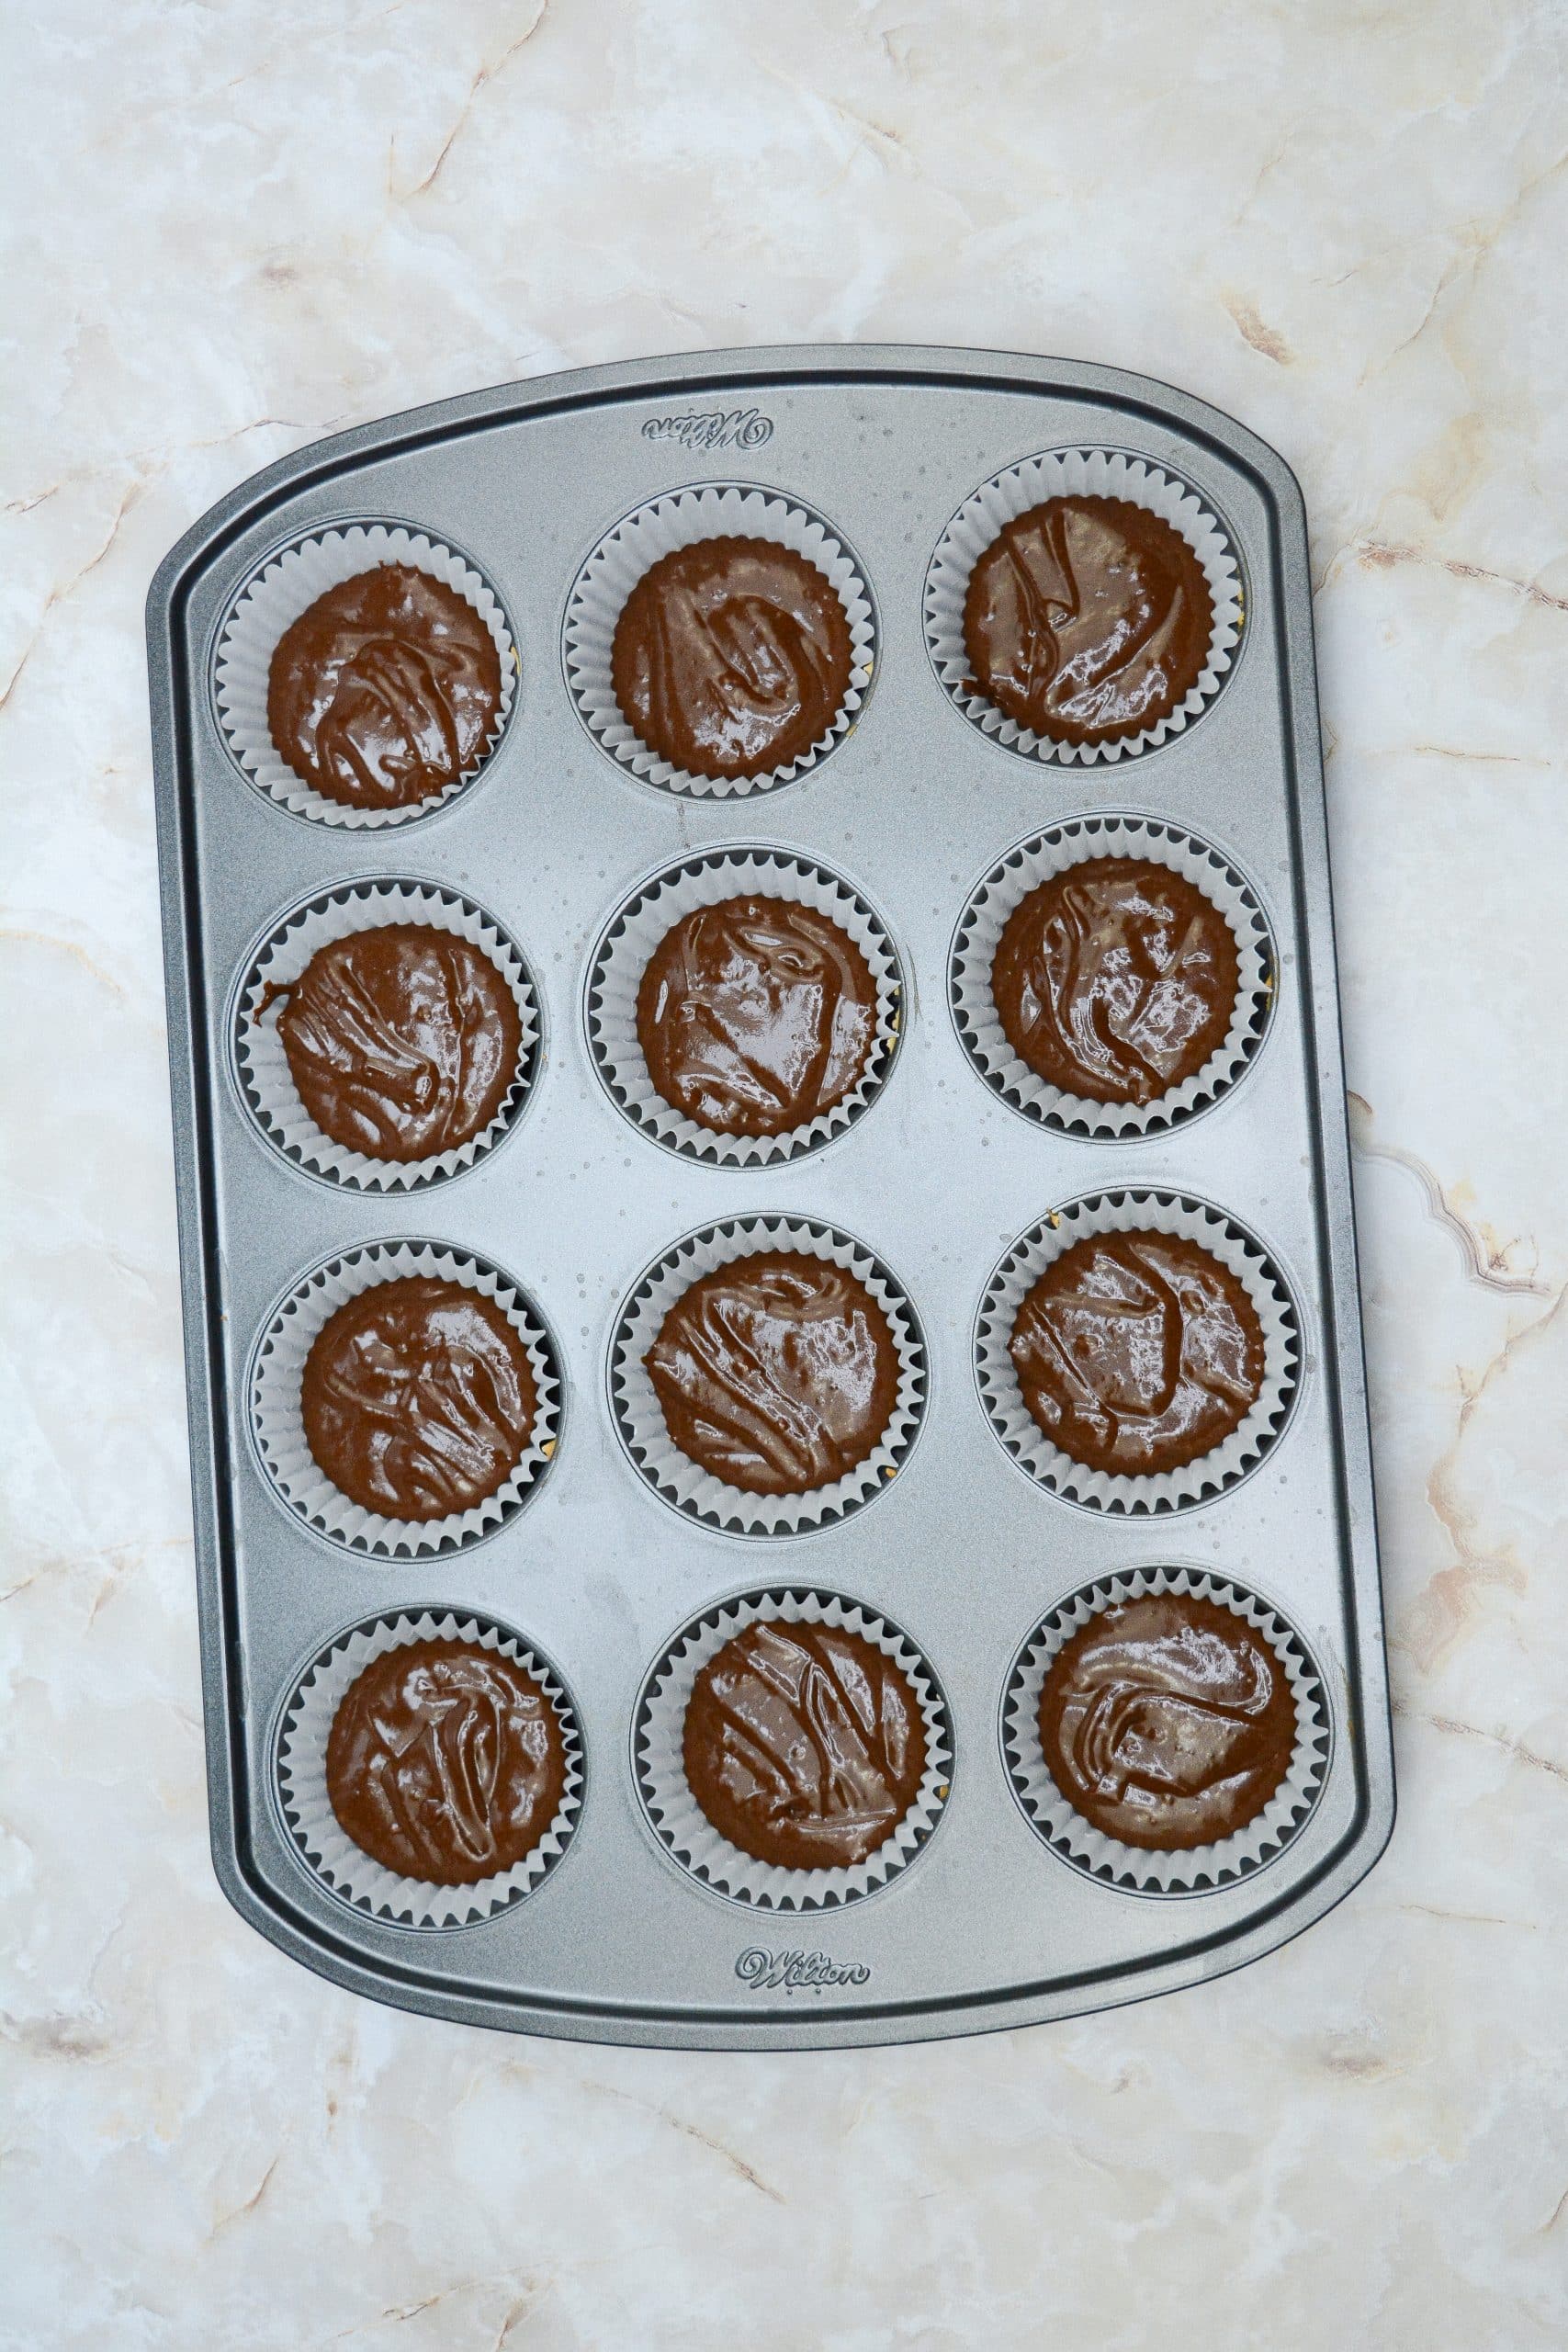 homemade chocolate cupcakes batter in a paper lined metal muffin tin